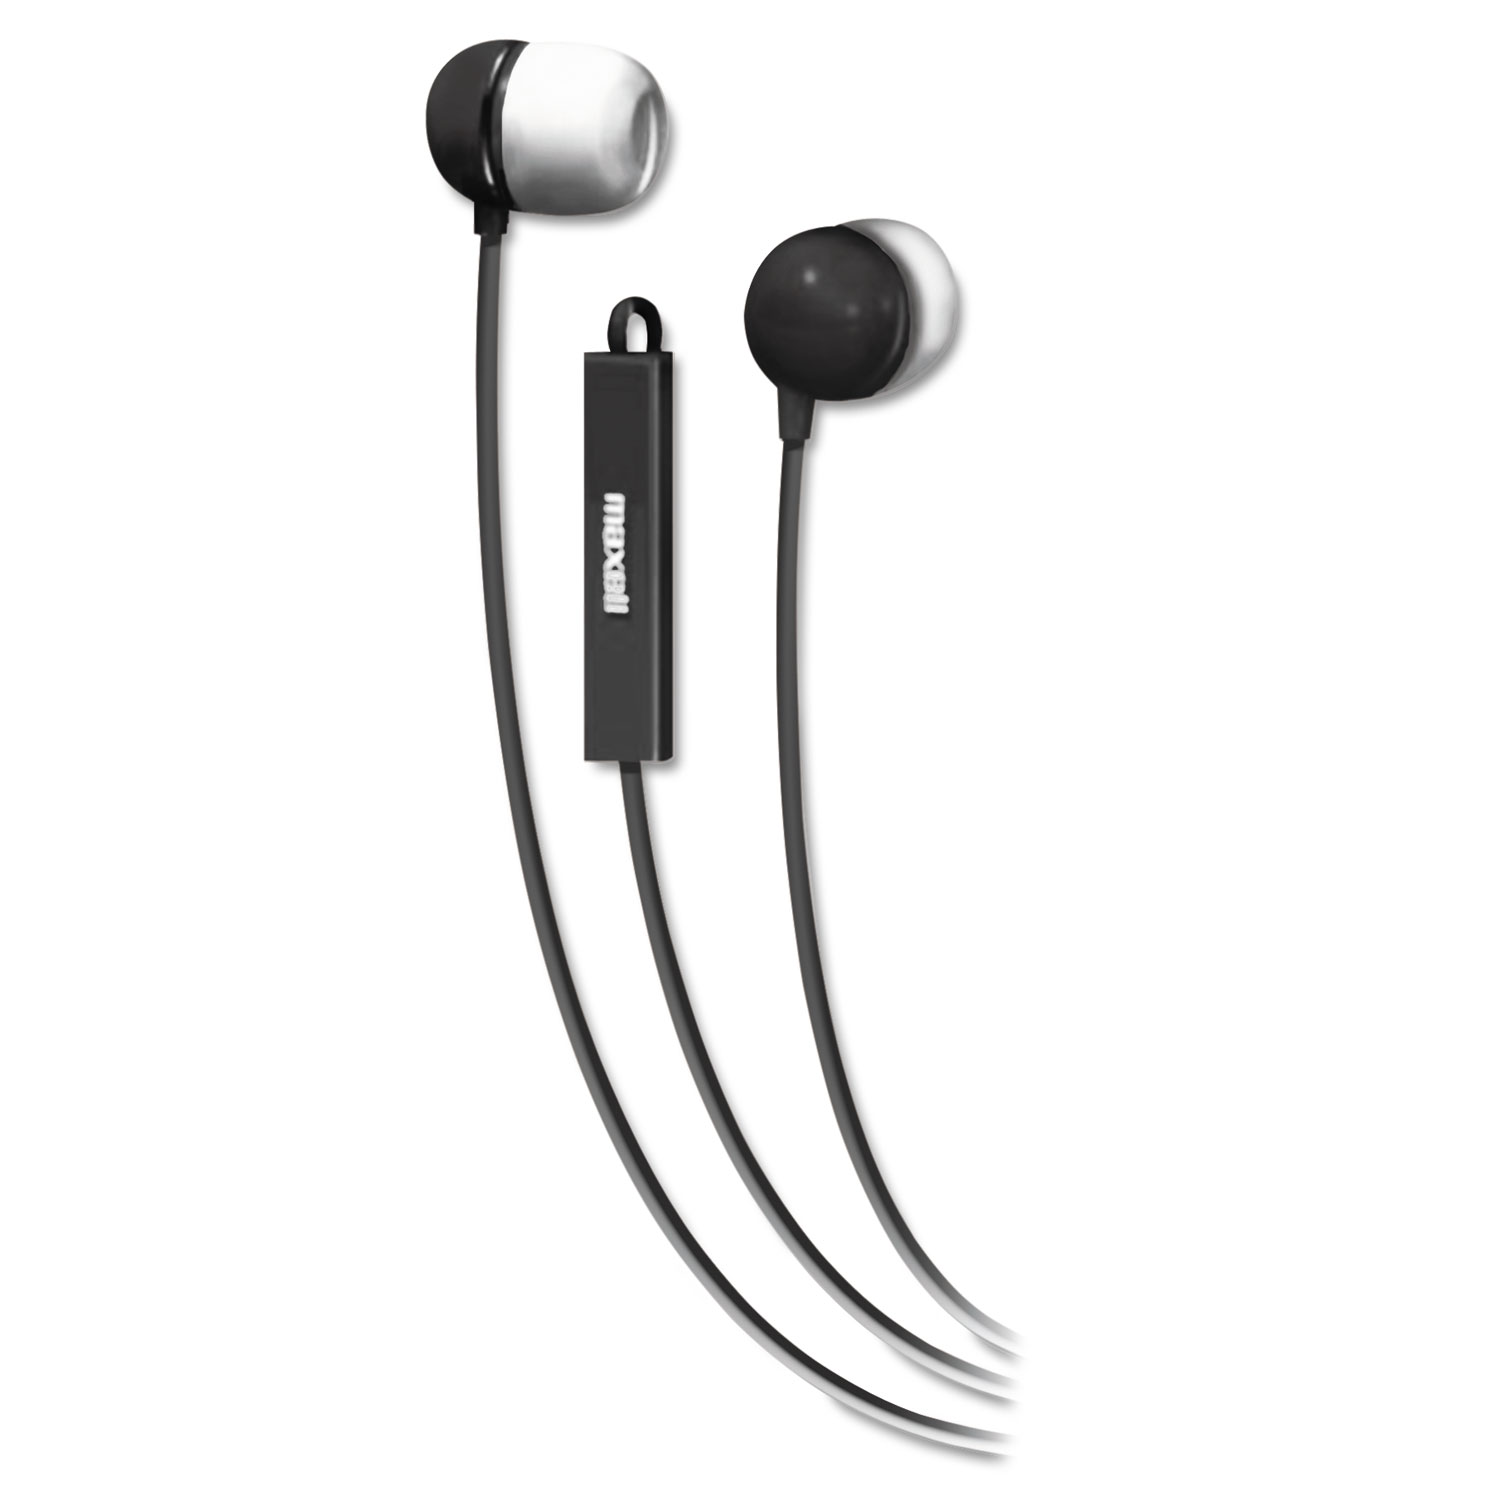 Maxell In-Ear Headphones, Black, MAX190300 - image 1 of 2